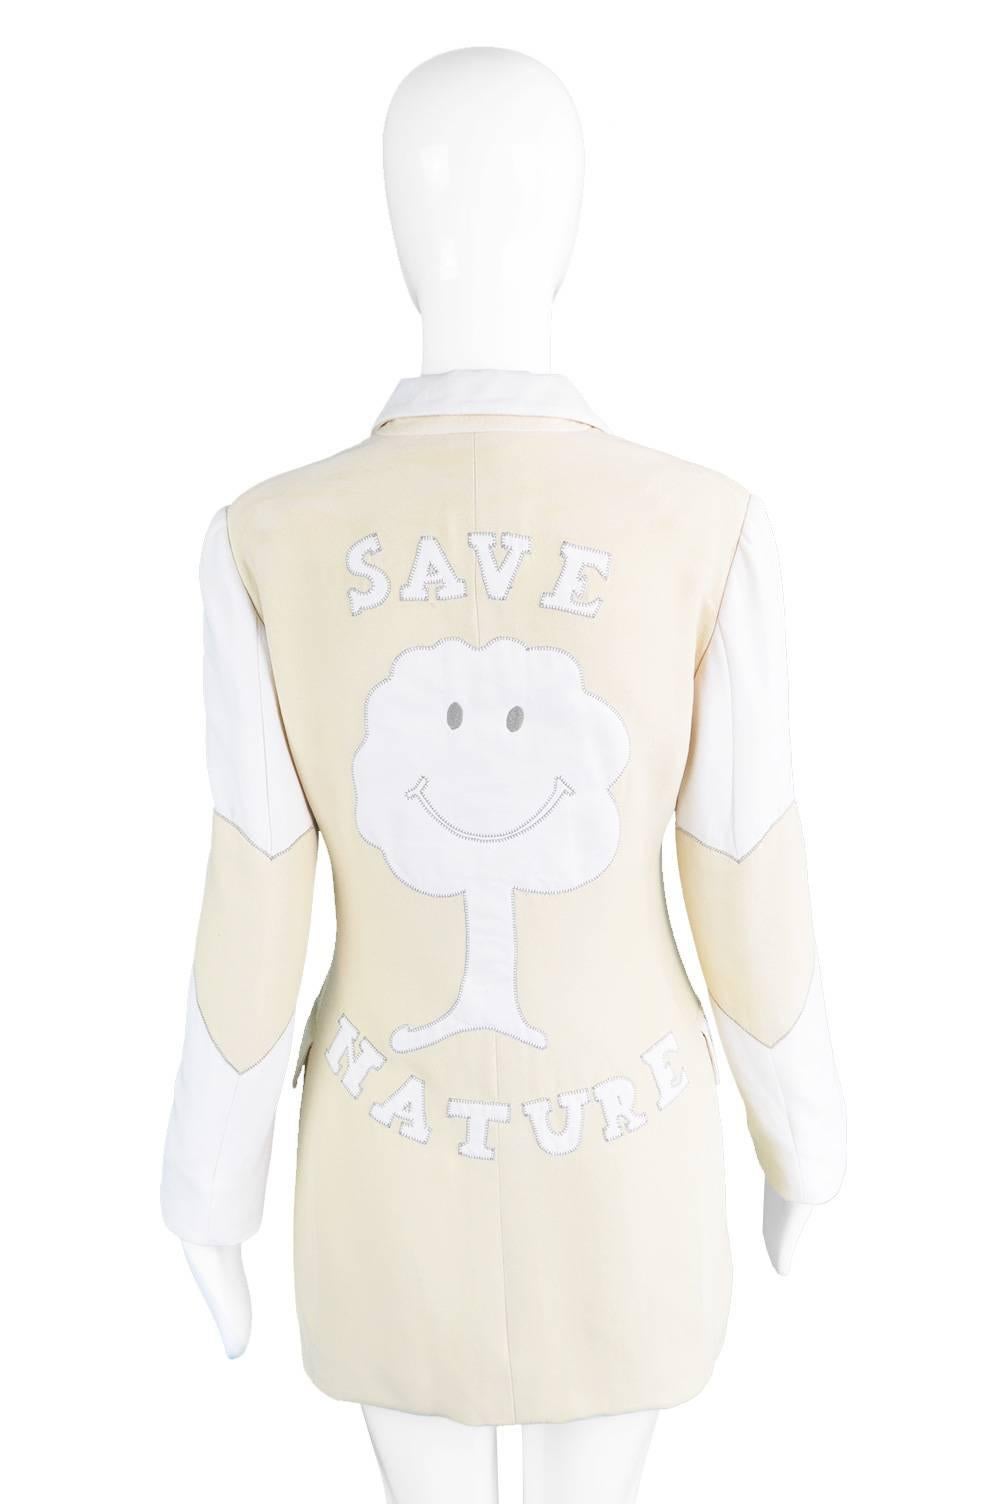 Women's Moschino 'Save Nature' Eco-couture Jacket - Franco's Final Collection, 1994